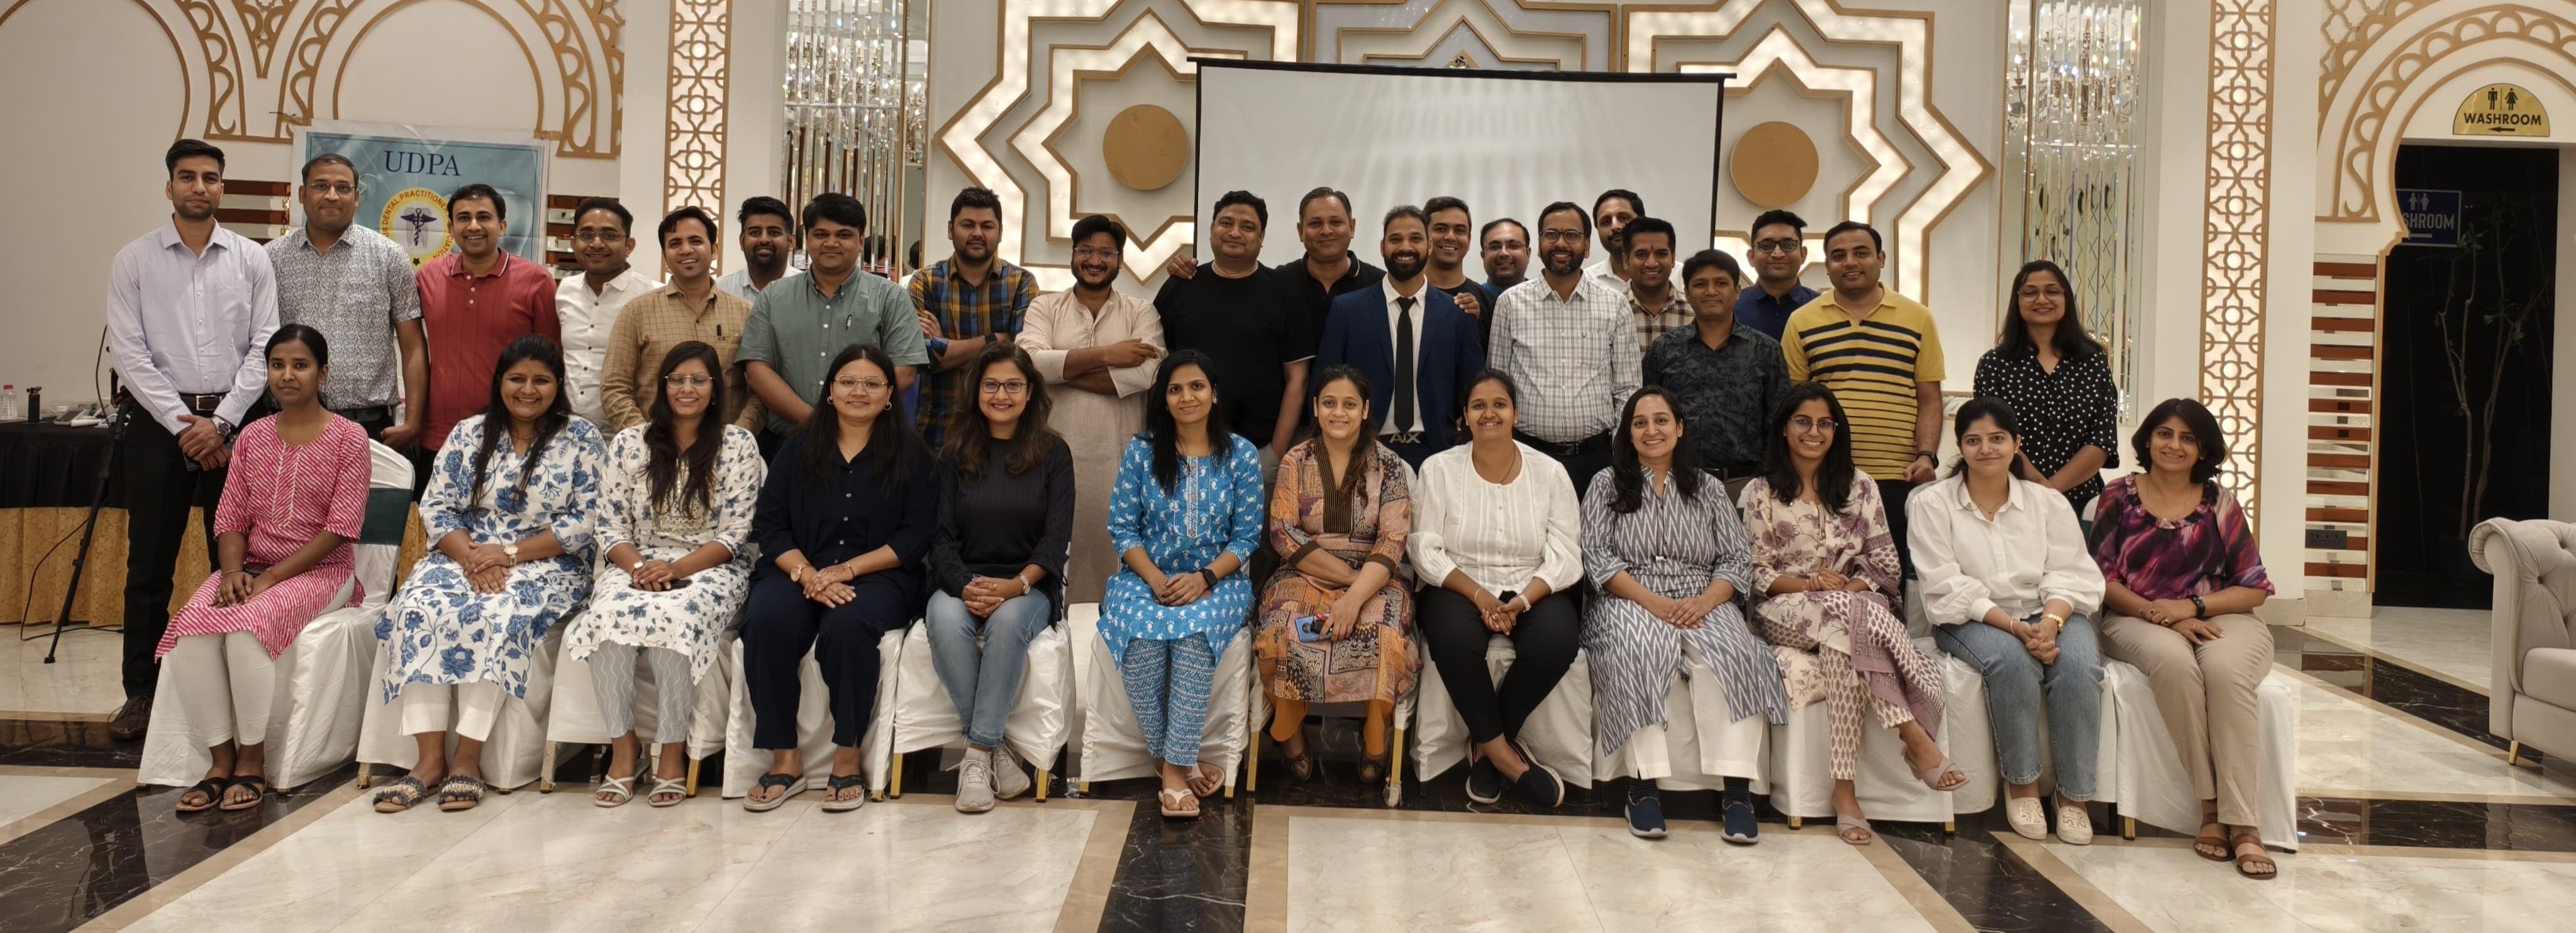 Advanced Workshop on Root Canal Procedures Concludes Successfully